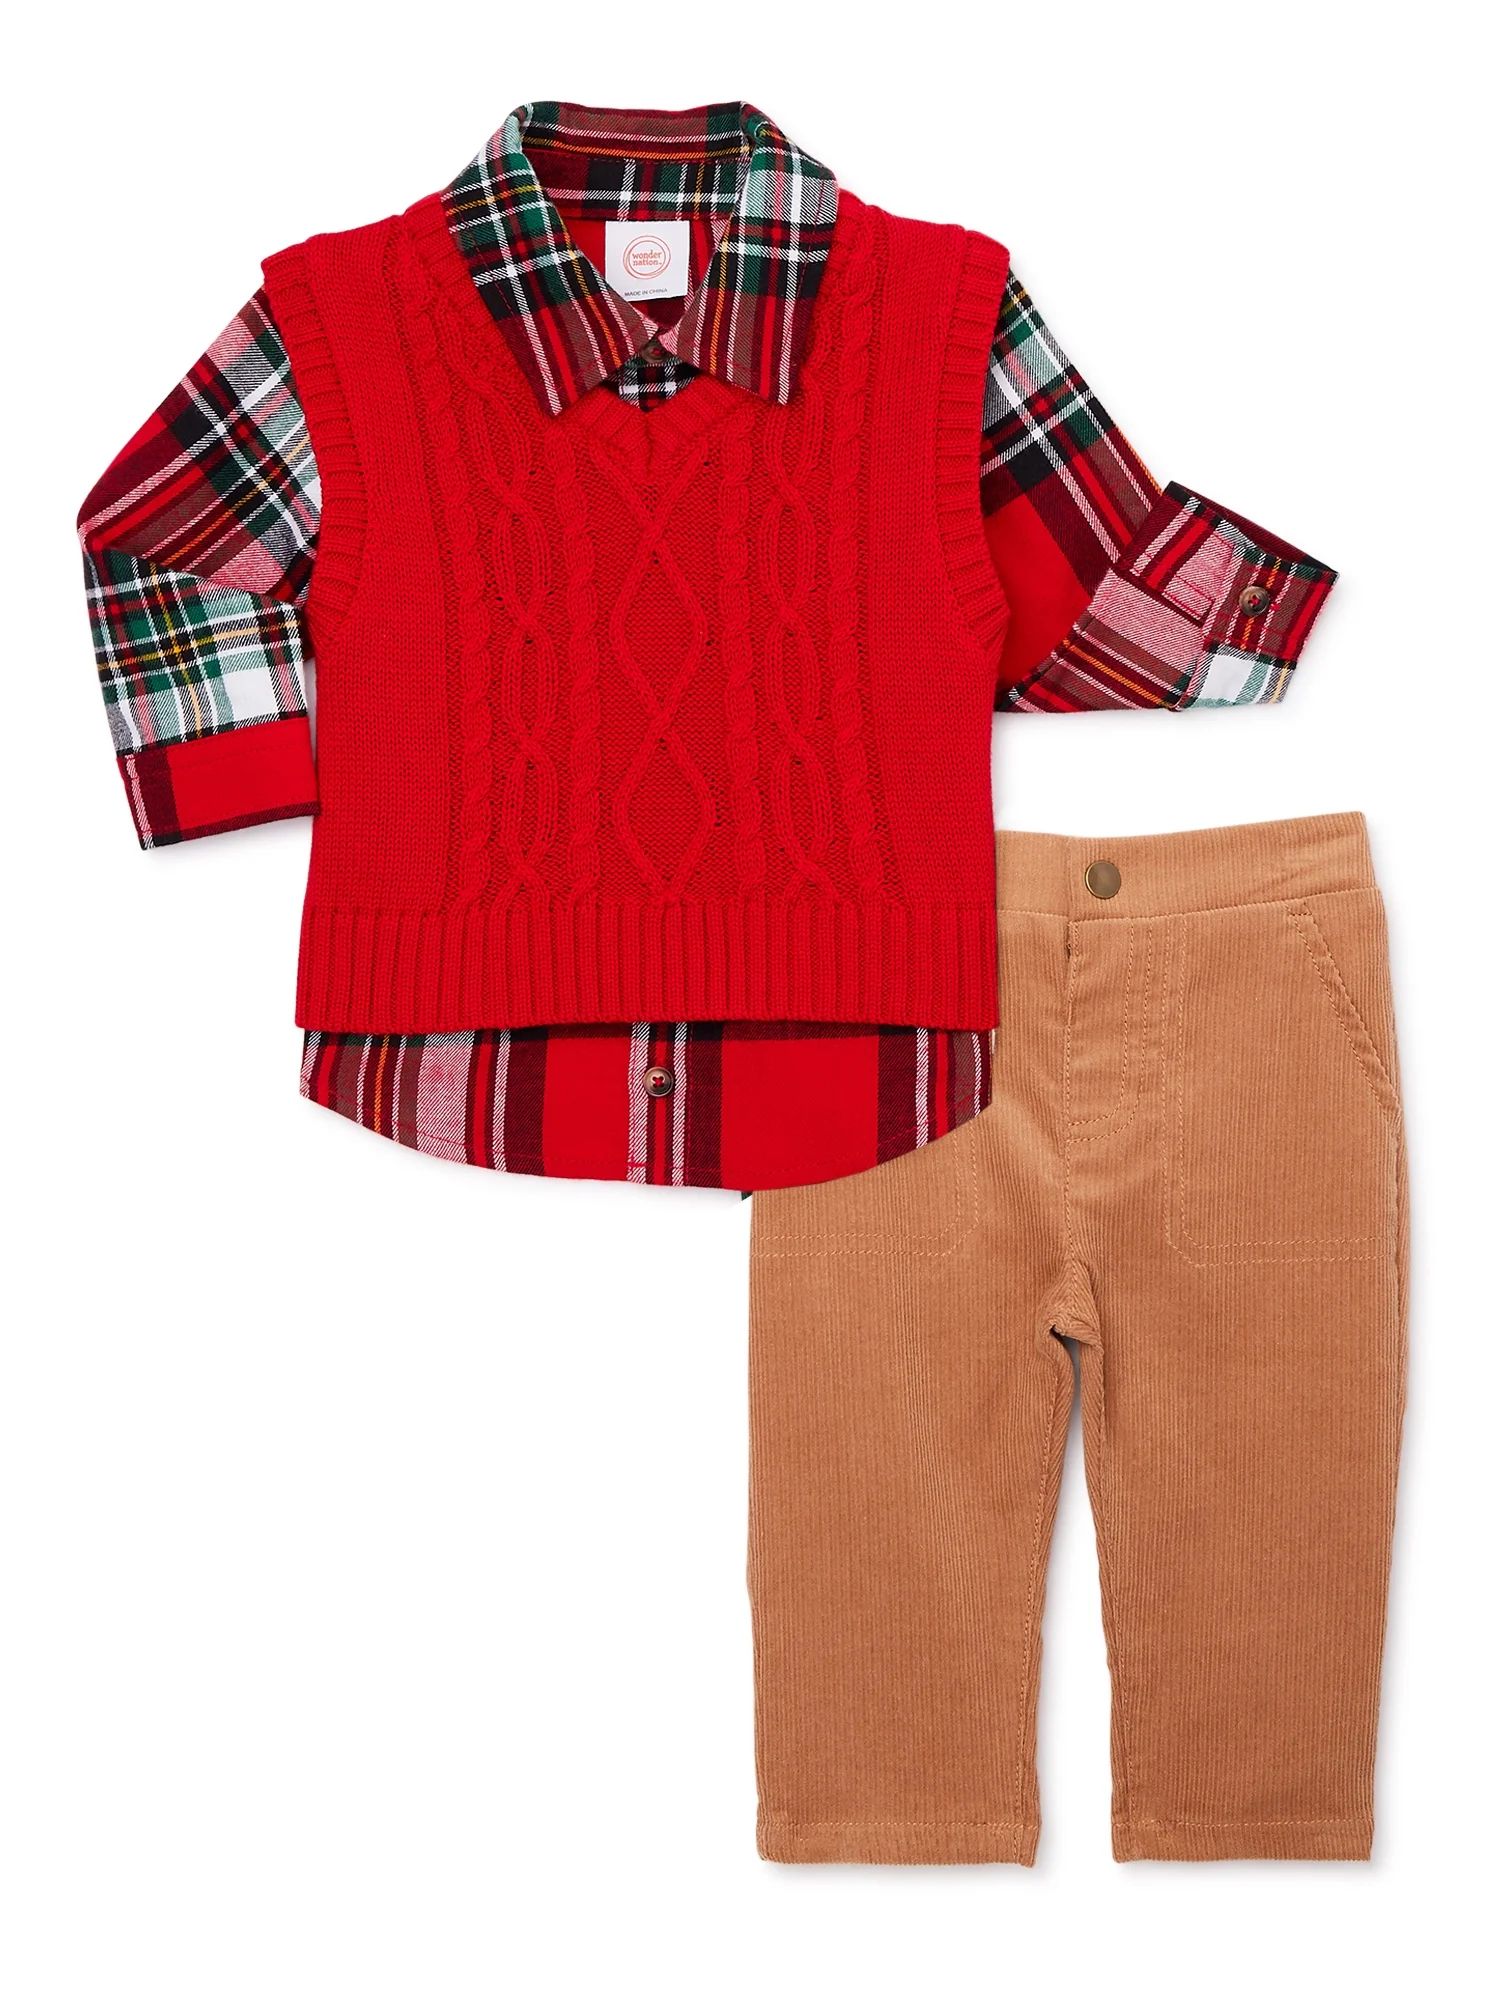 Wonder Nation Baby Boys’ Holiday Sweater Vest, Shirt, and Pants Outfit Set, 3-Piece Set, Sizes ... | Walmart (US)